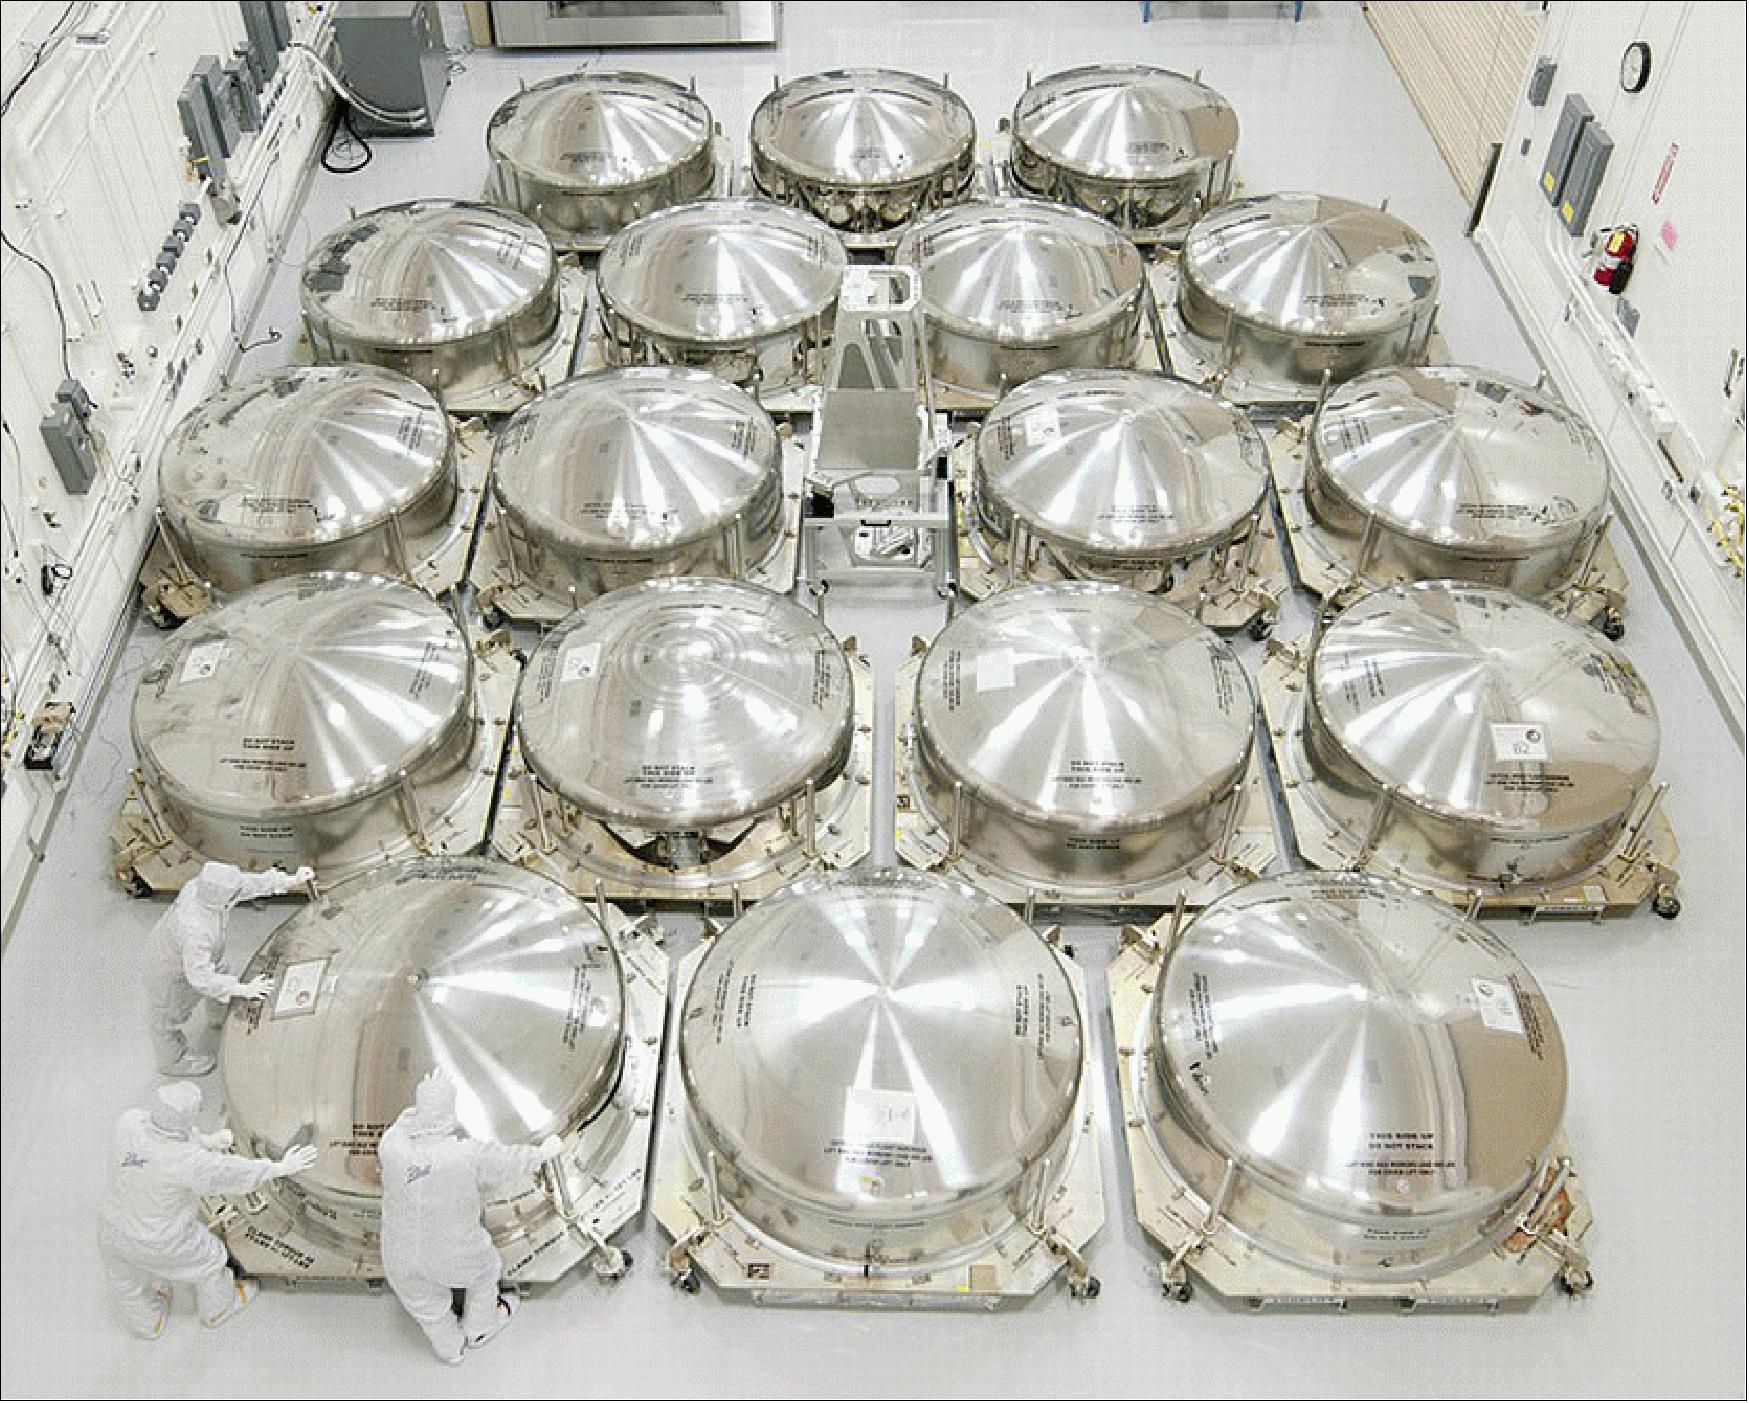 Figure 48: As at the end of 2013, all 18 of the JWST primary mirror segment assemblies are complete and have arrived at Goddard, where they are being stored inside separate stainless steel shock-absorbing canisters until it is time for mirror assembly (image credit: NASA)